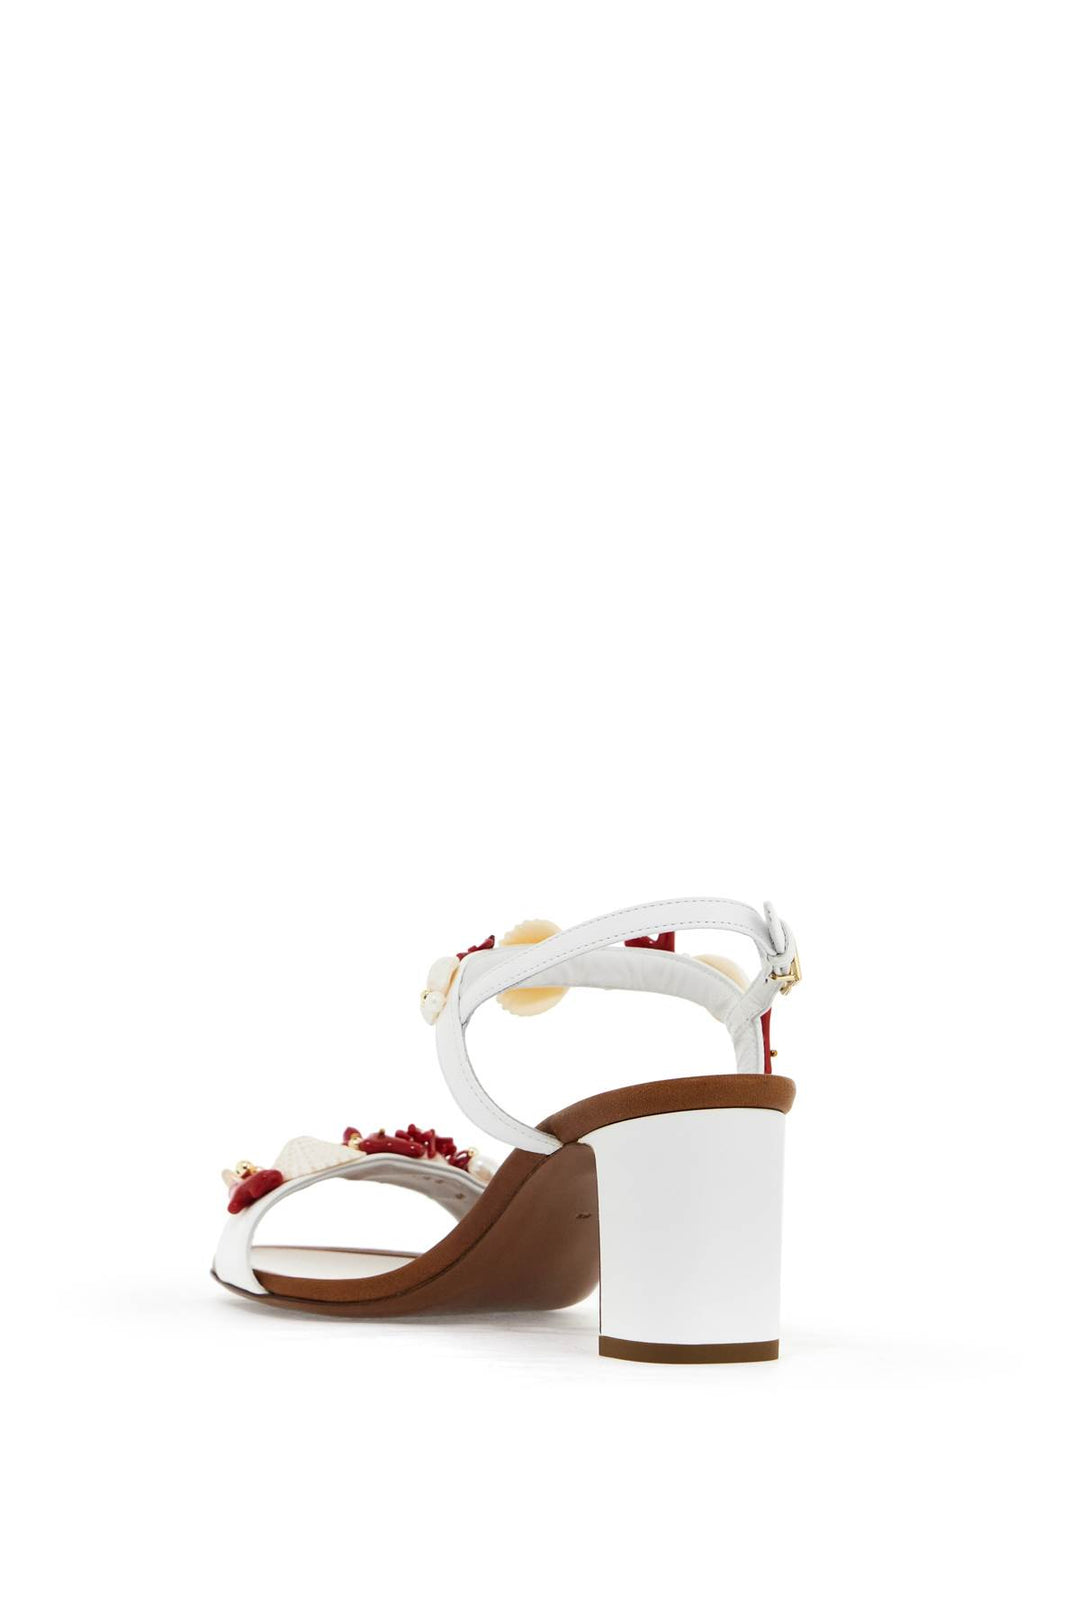 Dolce & Gabbana Nappa Sandals With Coral Embellishments   White